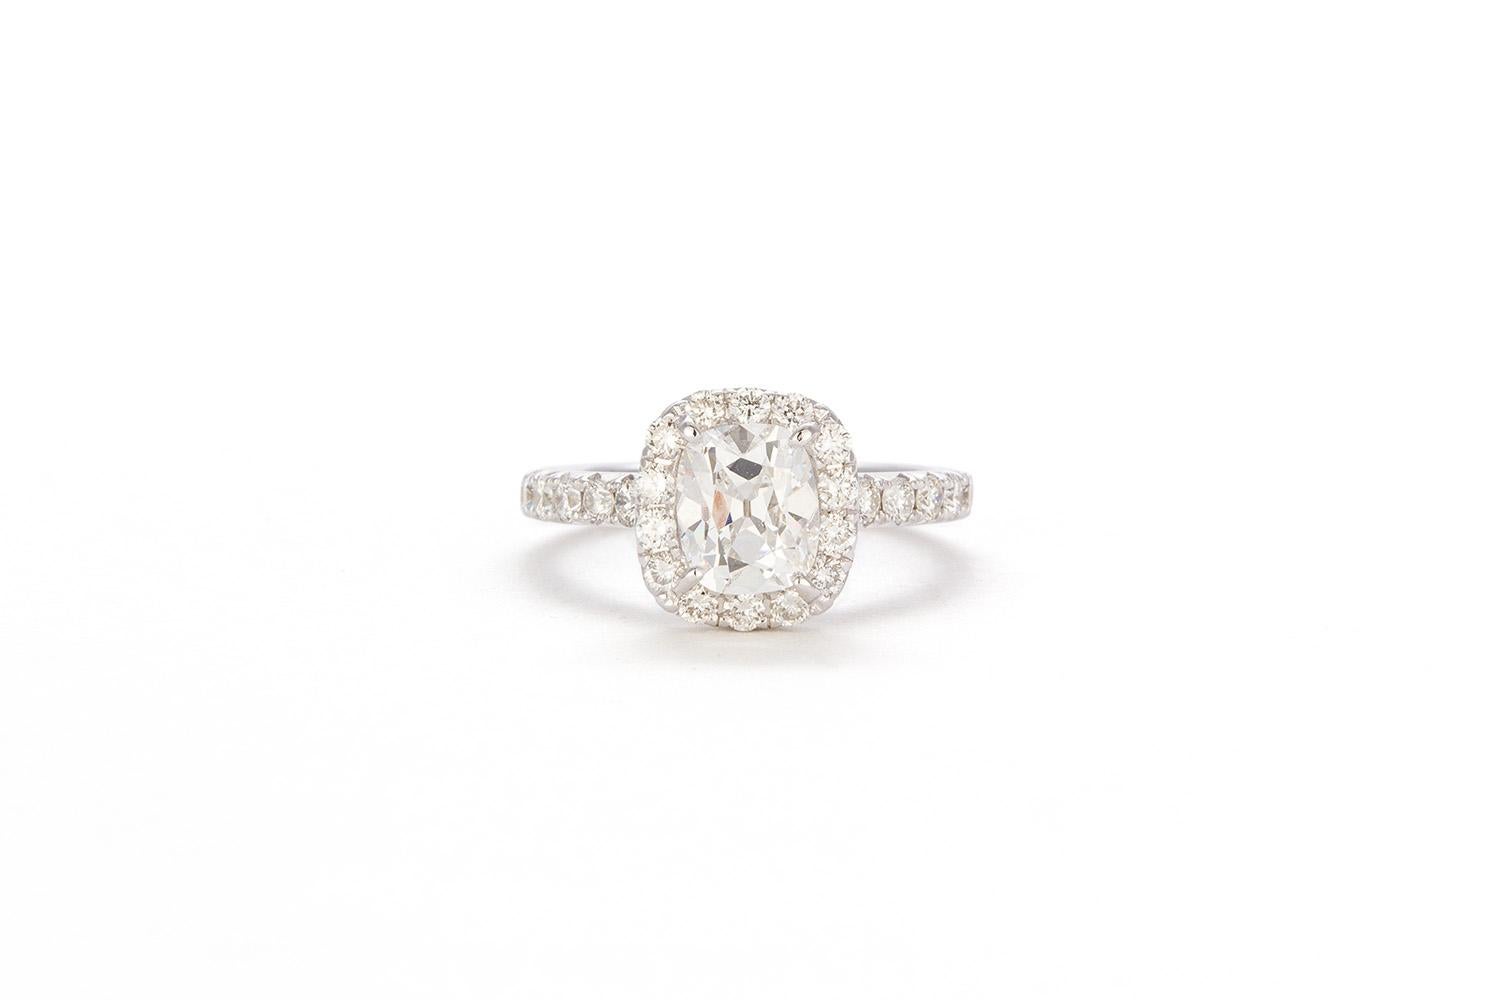 We are very pleased to present this remarkable 18k White Gold GIA Certified Cushion Cut Diamond Halo Engagement Ring. This stunning ring features a GIA Certified 1.31ct F/VVS2 Cushion Cut Diamond set in a 14k white gold halo ring accented by 0.56ctw